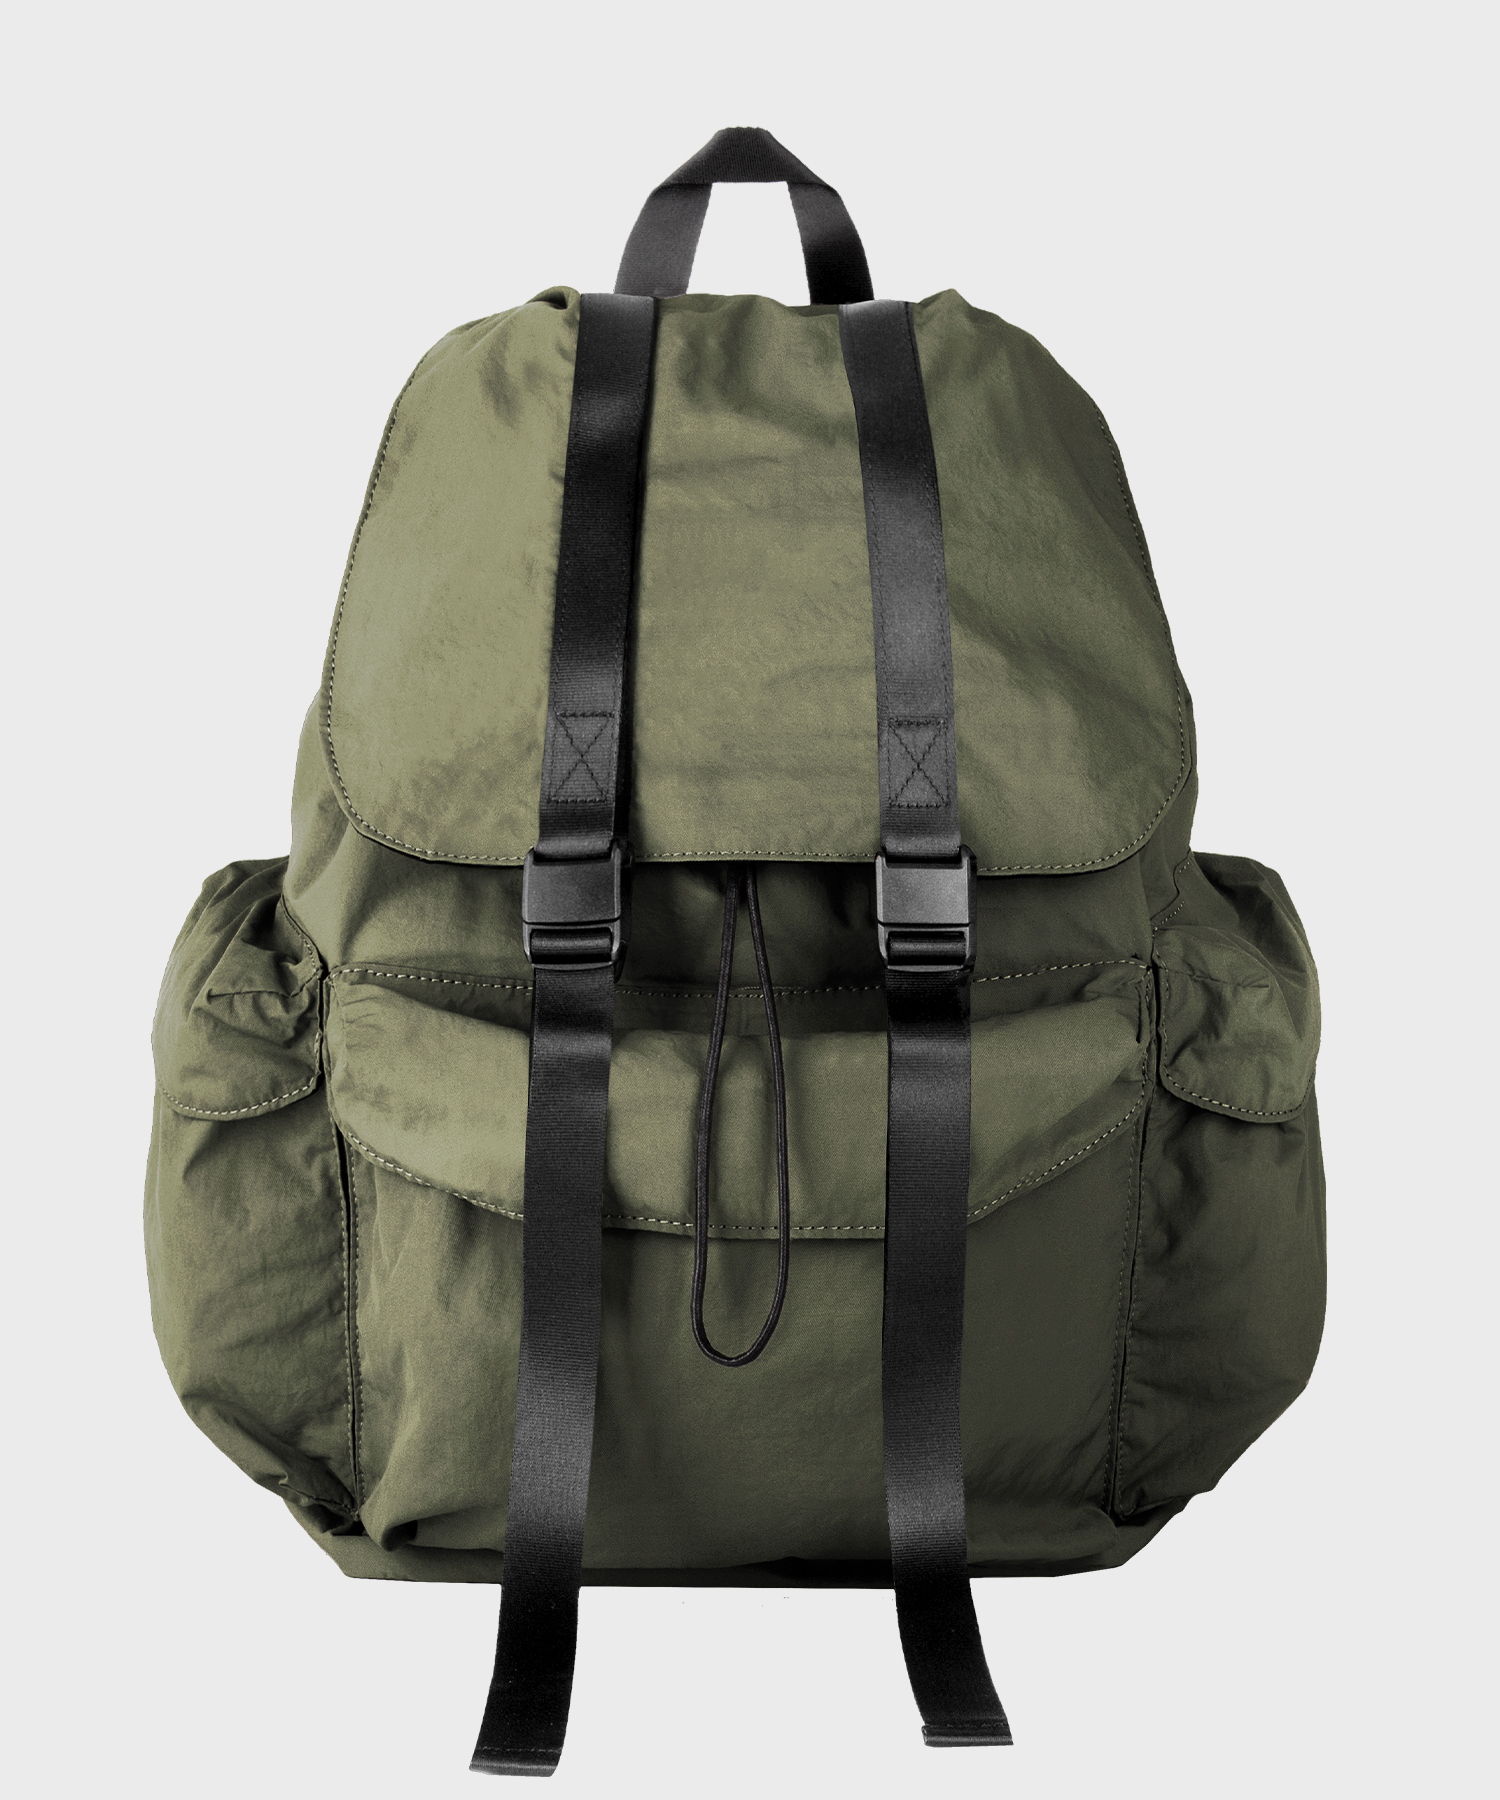 BOHEMIAN BACKPACK (OLIVE DRAB) / RECYCLED